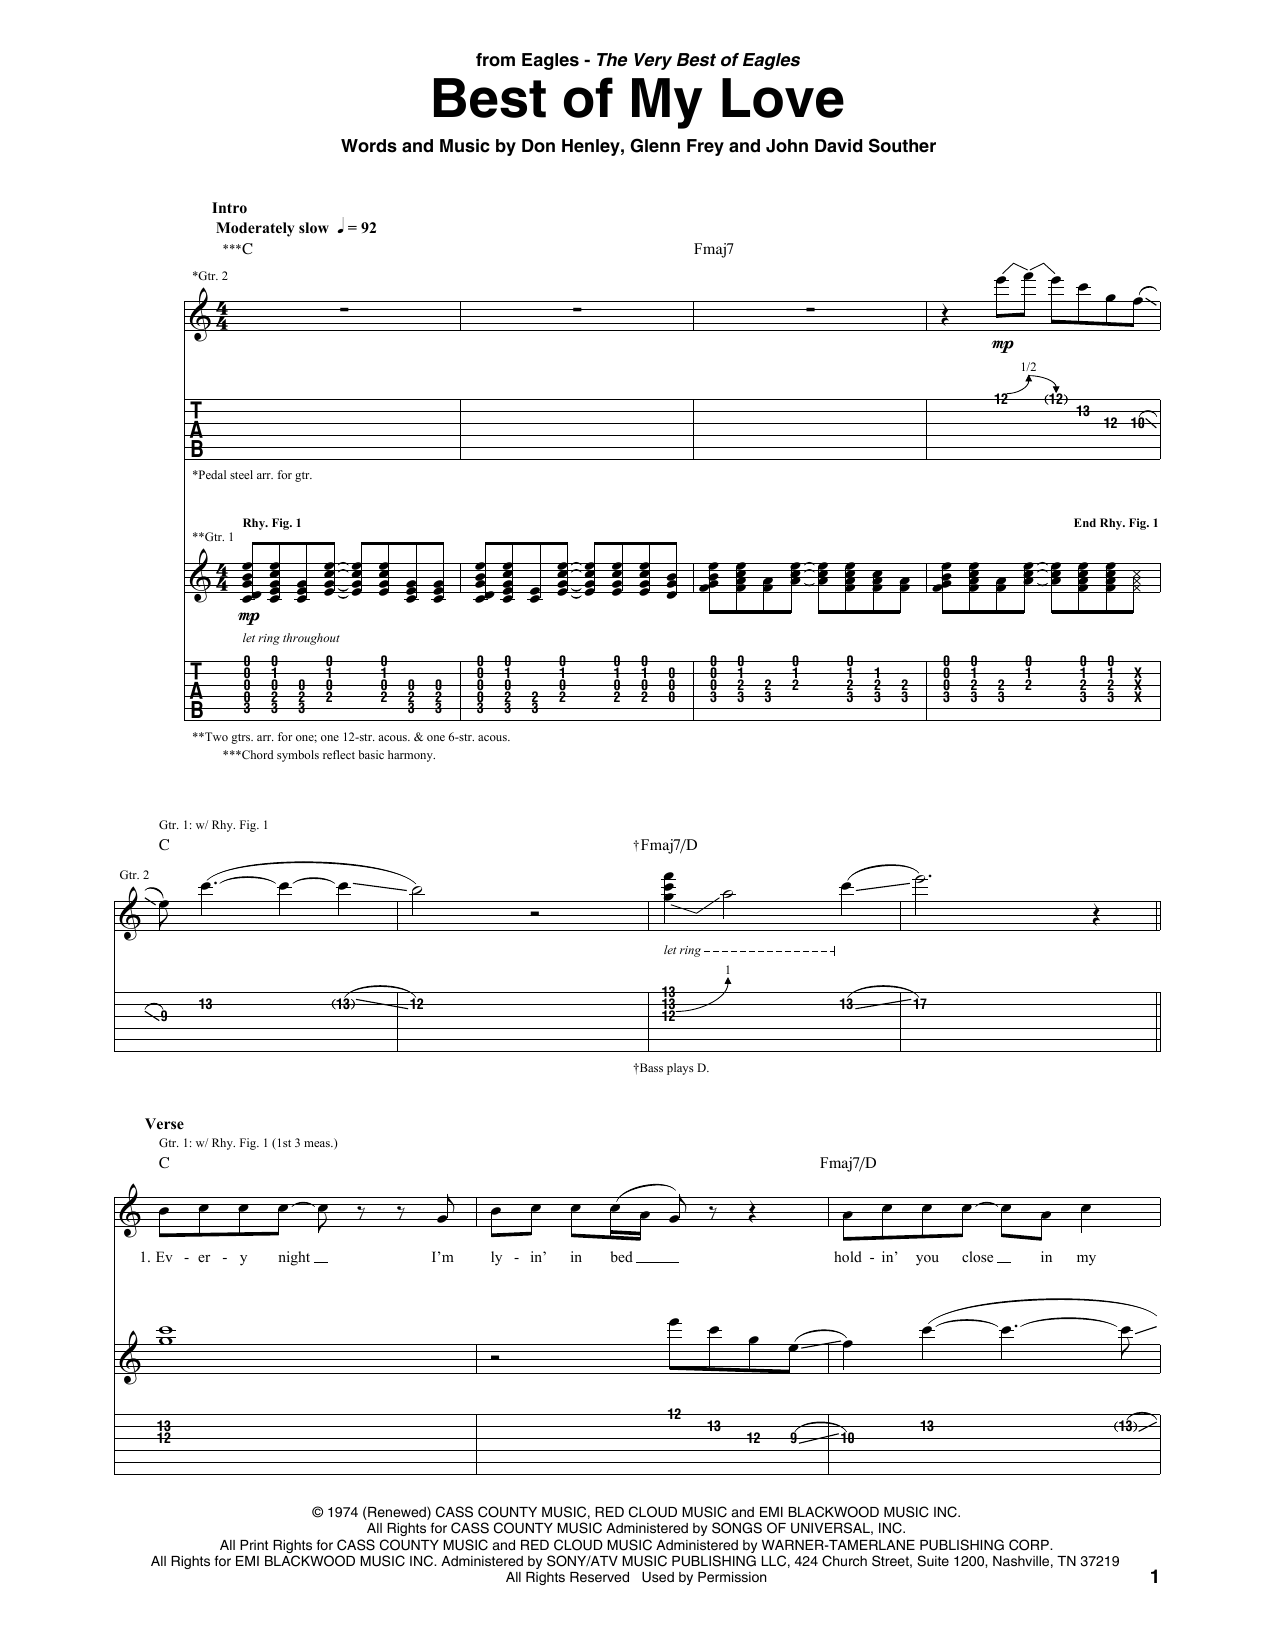 Eagles Best Of My Love sheet music notes and chords. Download Printable PDF.